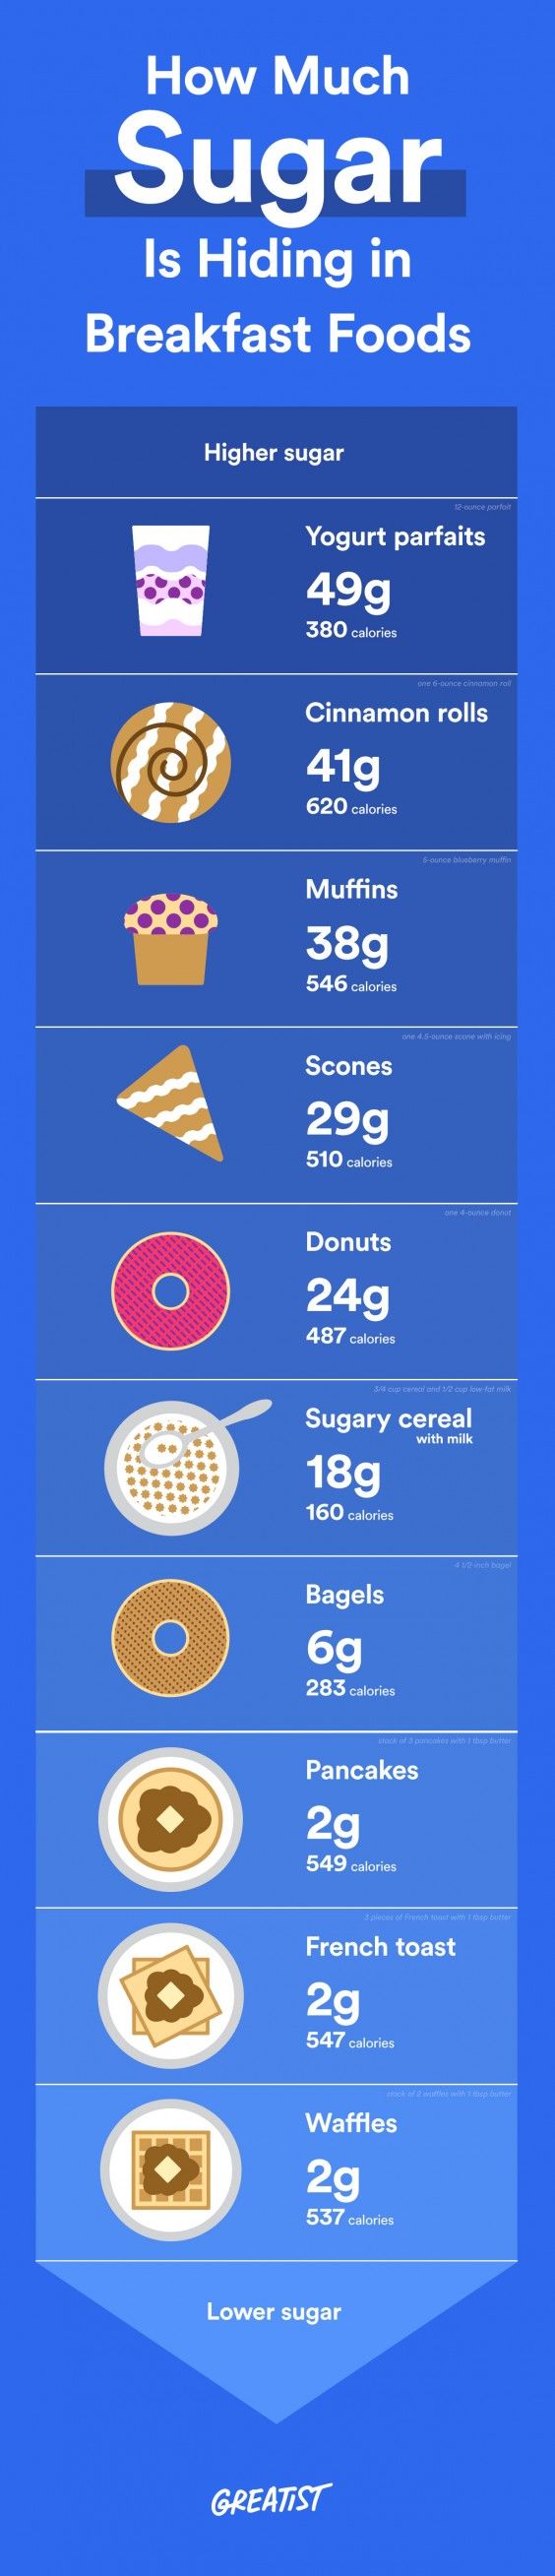 Which Sweet Breakfast Foods Contain The Most Sugar?